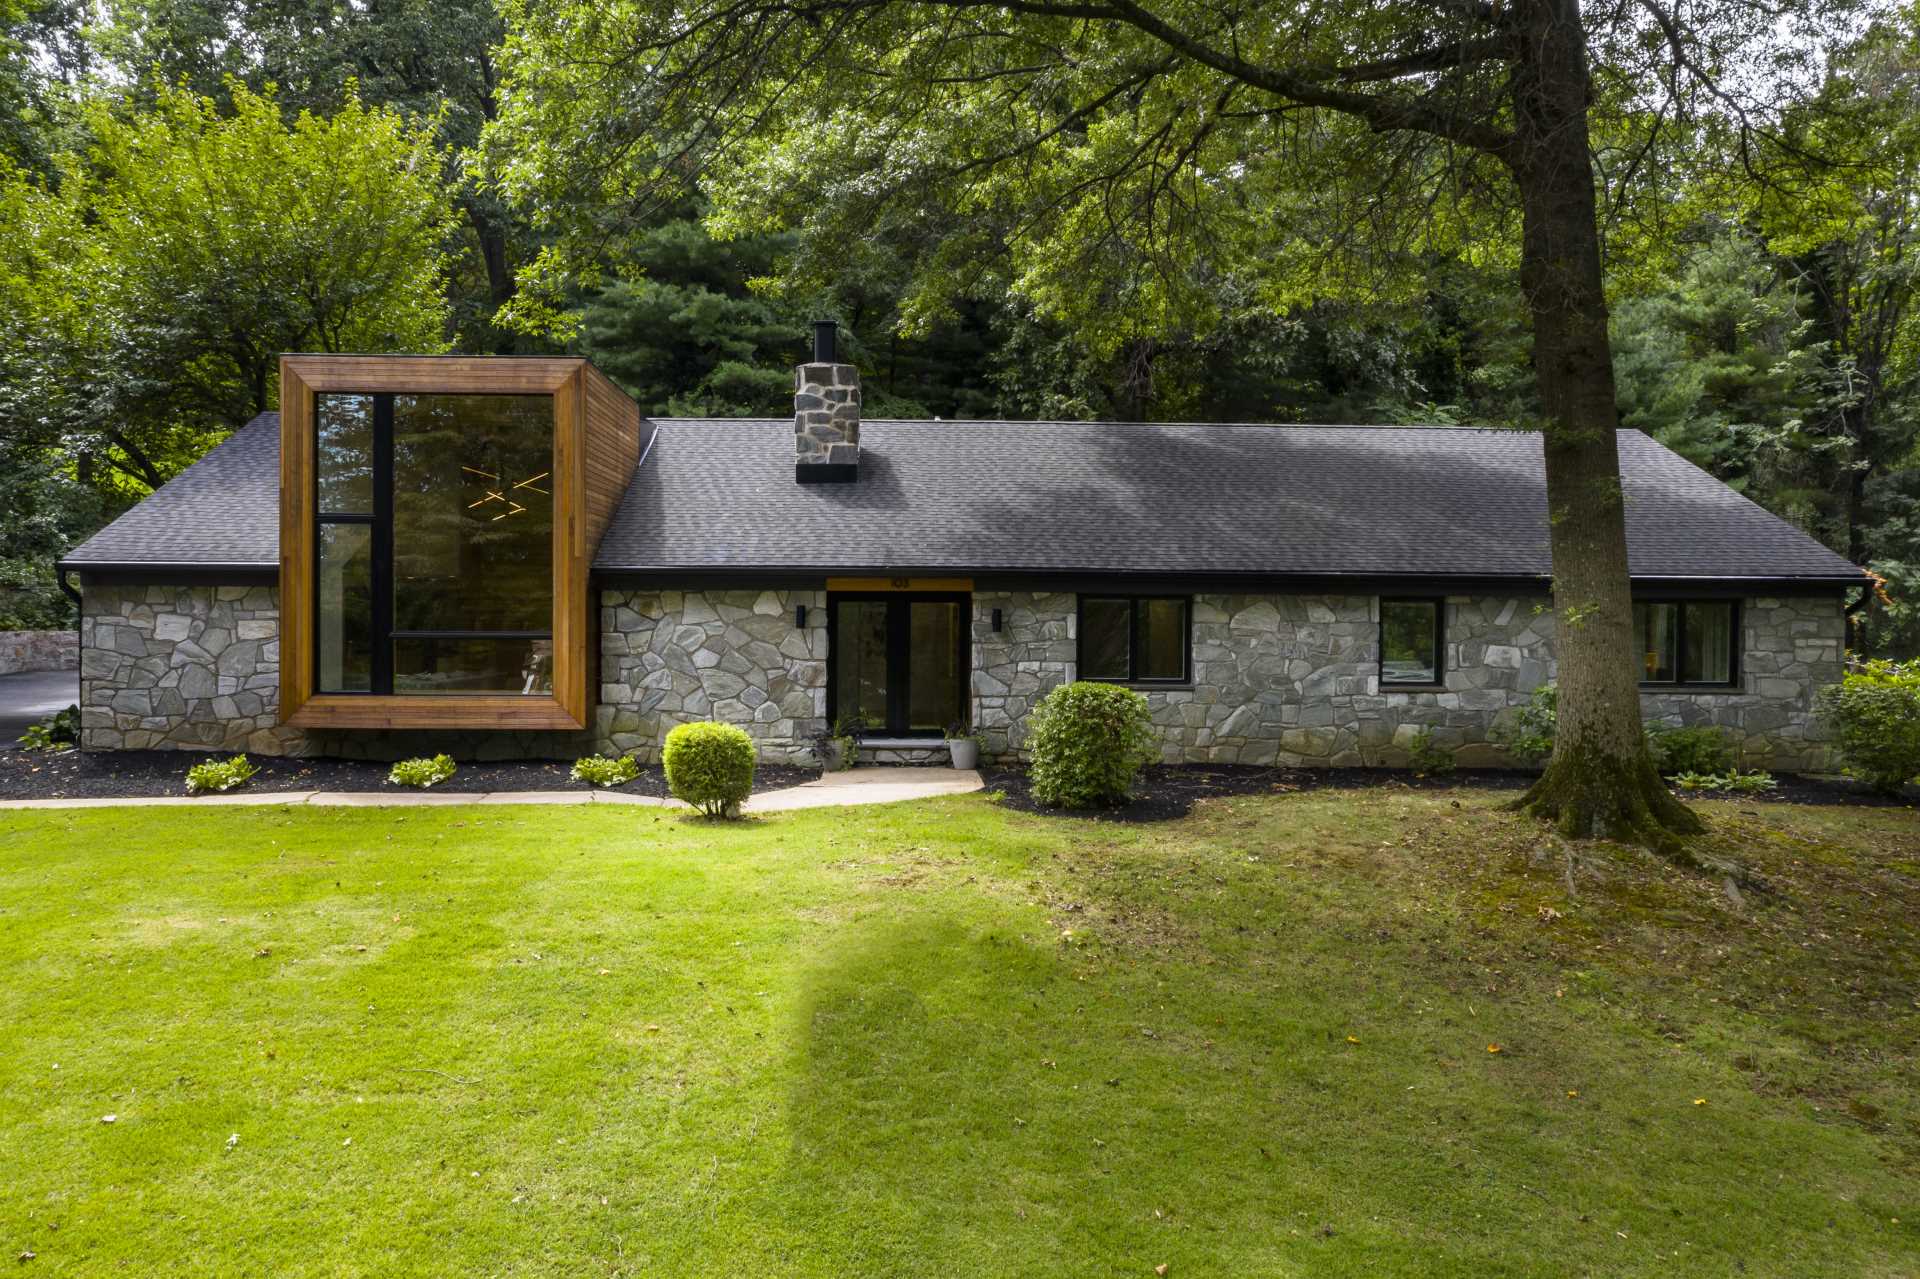 A remodeled 1950s ranch home with stone walls and a cedar-clad accent.